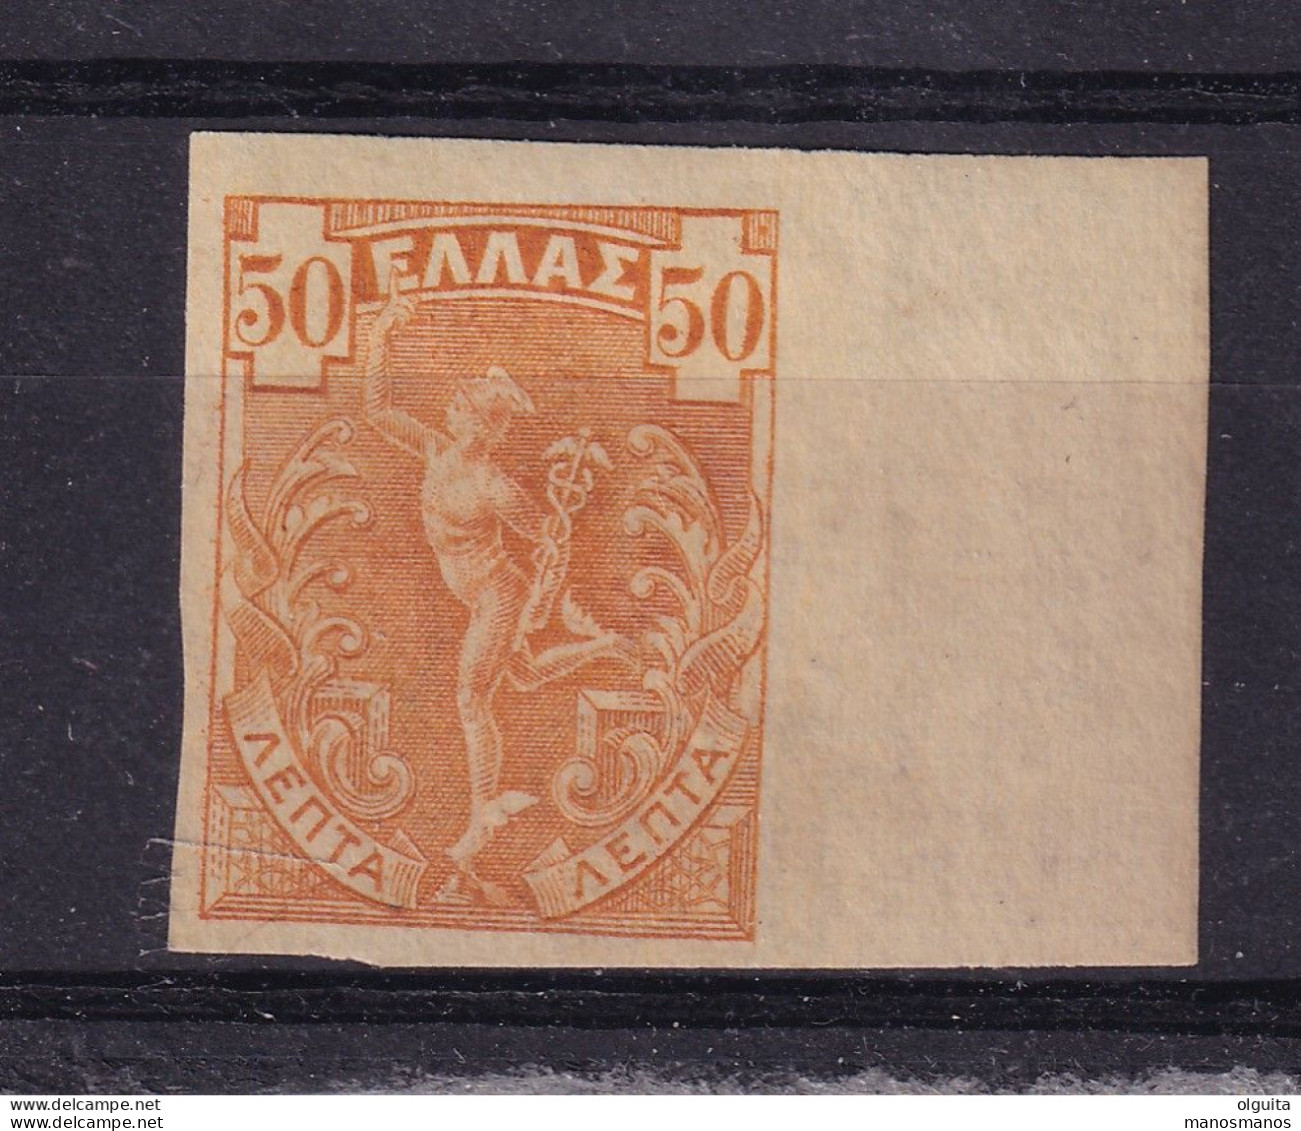 DCPGR 094 - GREECE Iptamenos - Imperforate Marginal Pair - 30 Lepta In Definitive Colour - Mint Lightly Hinged - Charity Issues